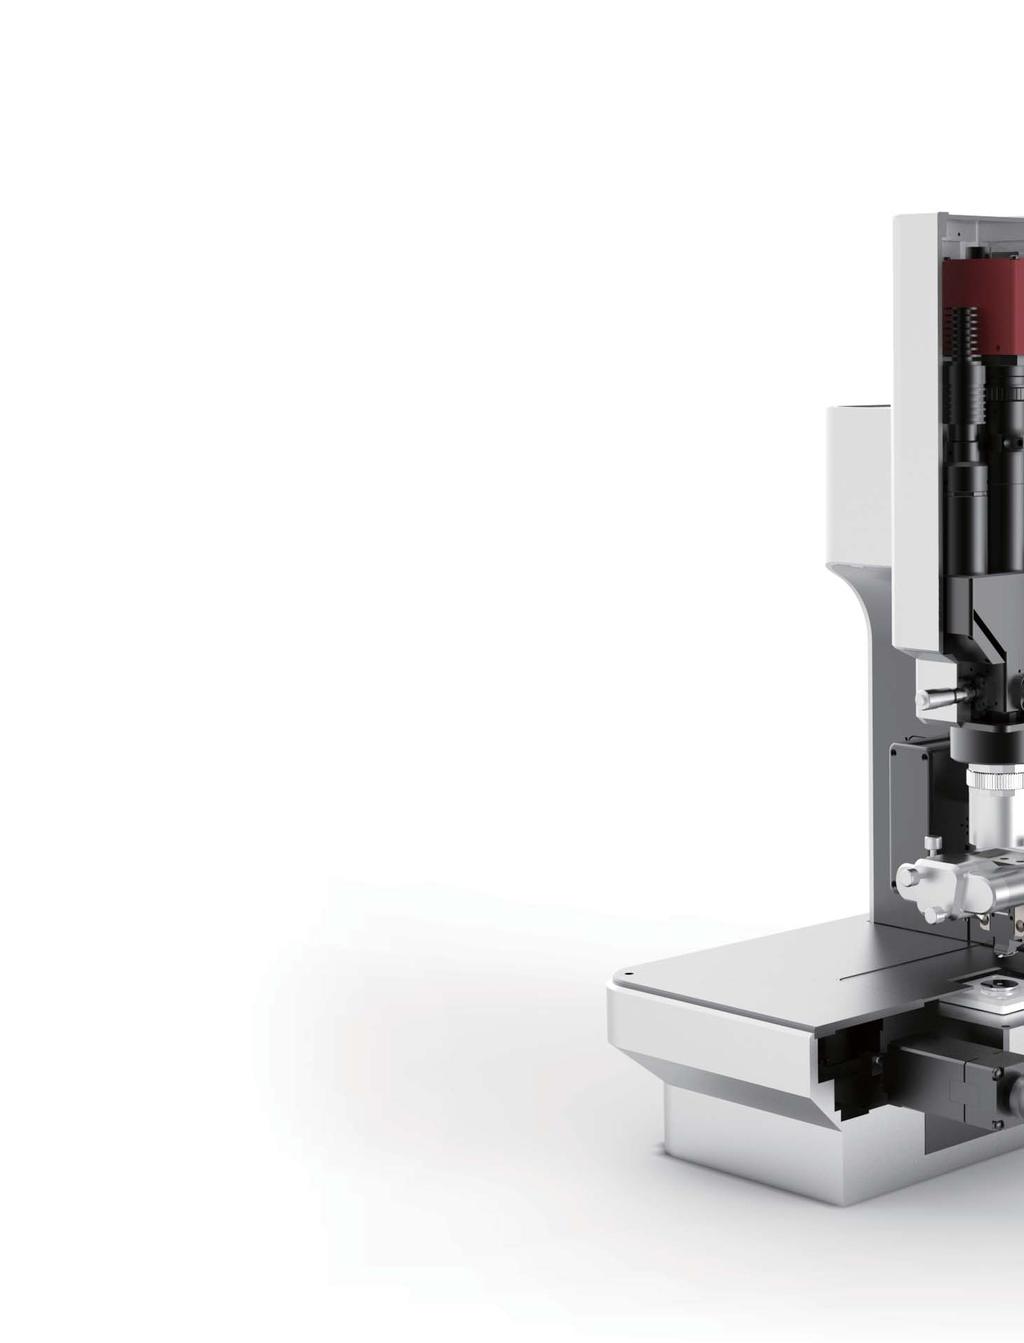 Equipped with the most innovative AFM technology 1 2D Flexure-Guided Scanner with 50 µm x 50 µm Scan Range The XY scanner consists of symmetrical 2-dimensional flexure and high-force piezoelectric